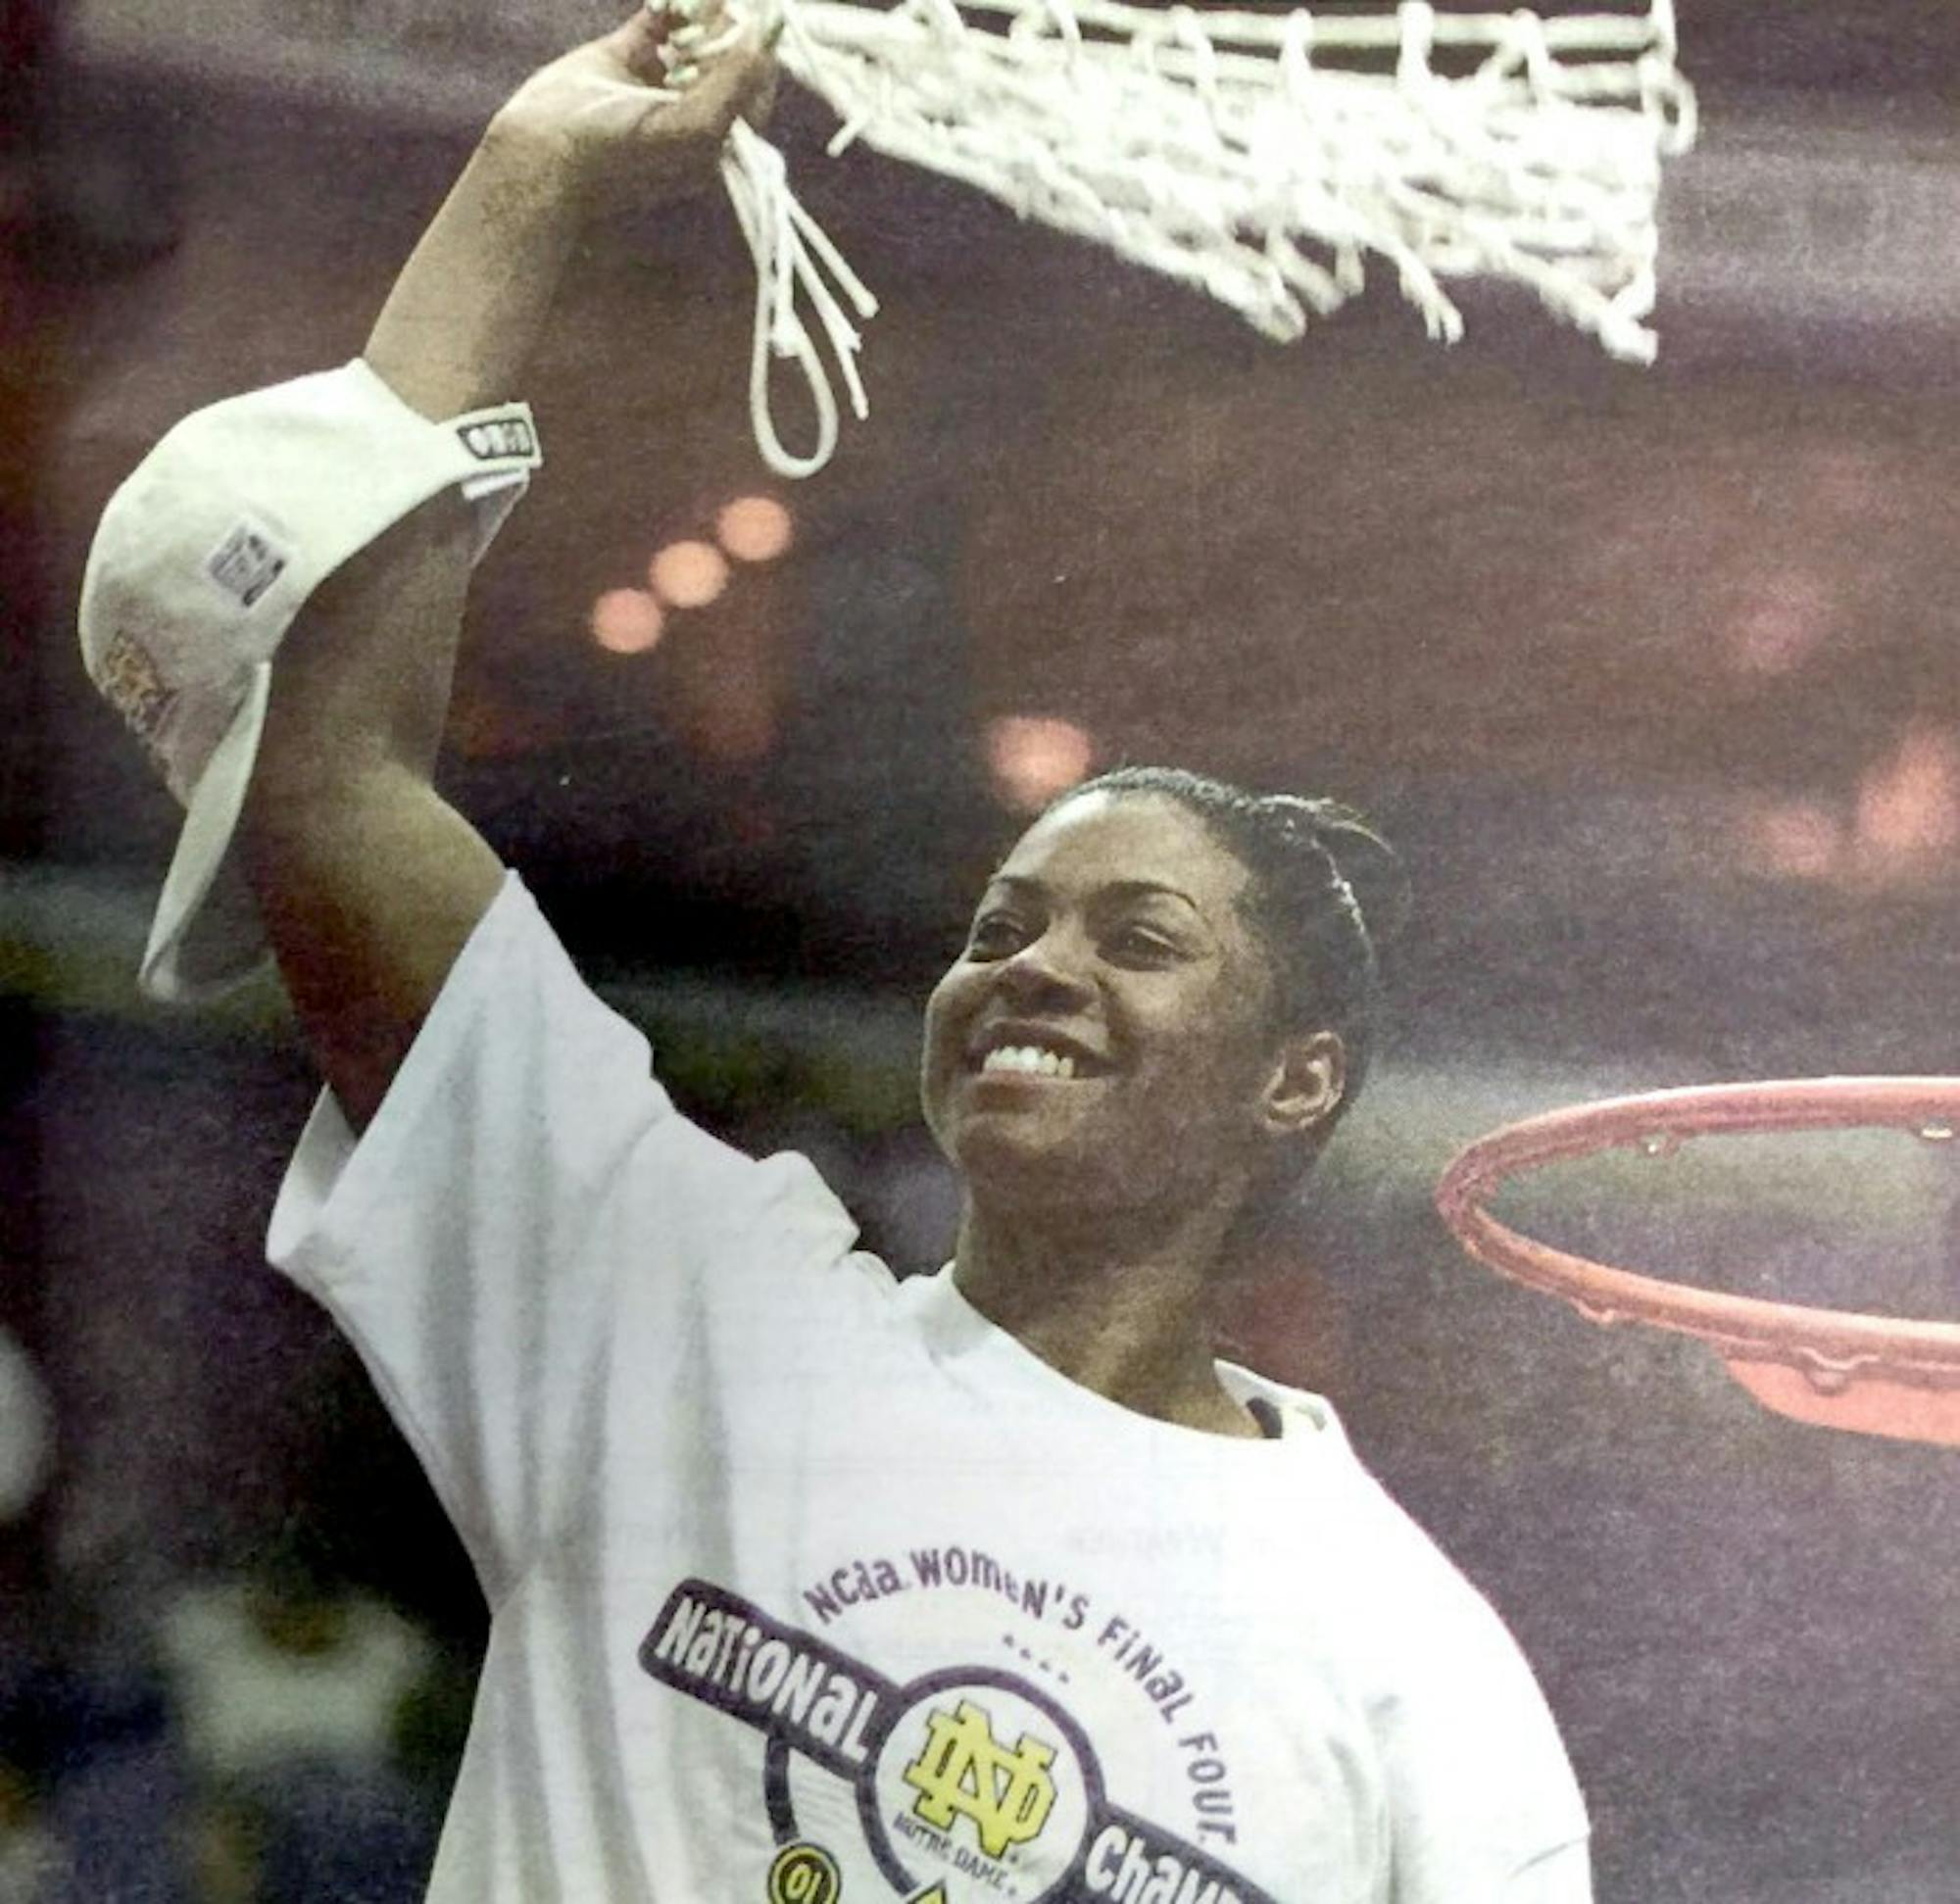 Former Irish guard Niele Ivey celebrates after Notre Dame’s 68-66 win over Purdue in the NCAA championship on April 2, 2001.